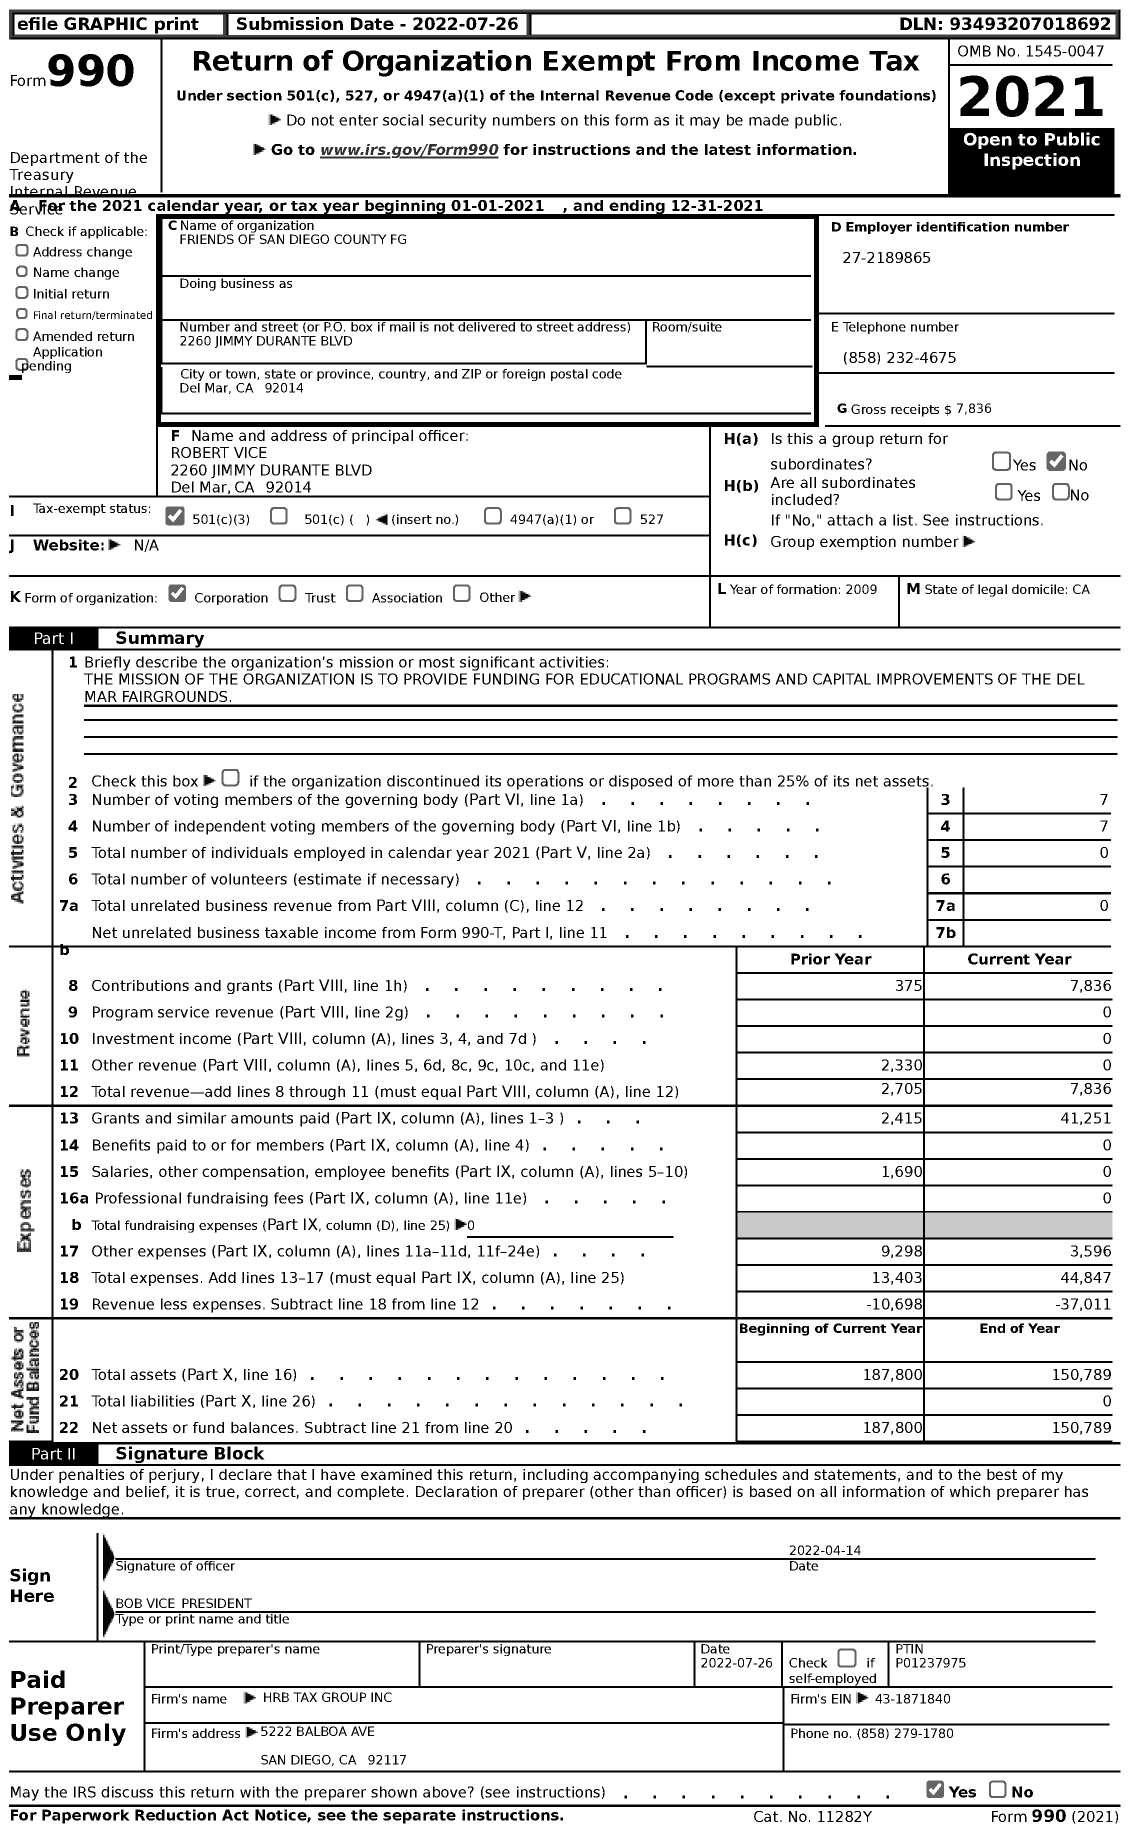 Image of first page of 2021 Form 990 for Friends of San Diego County FG